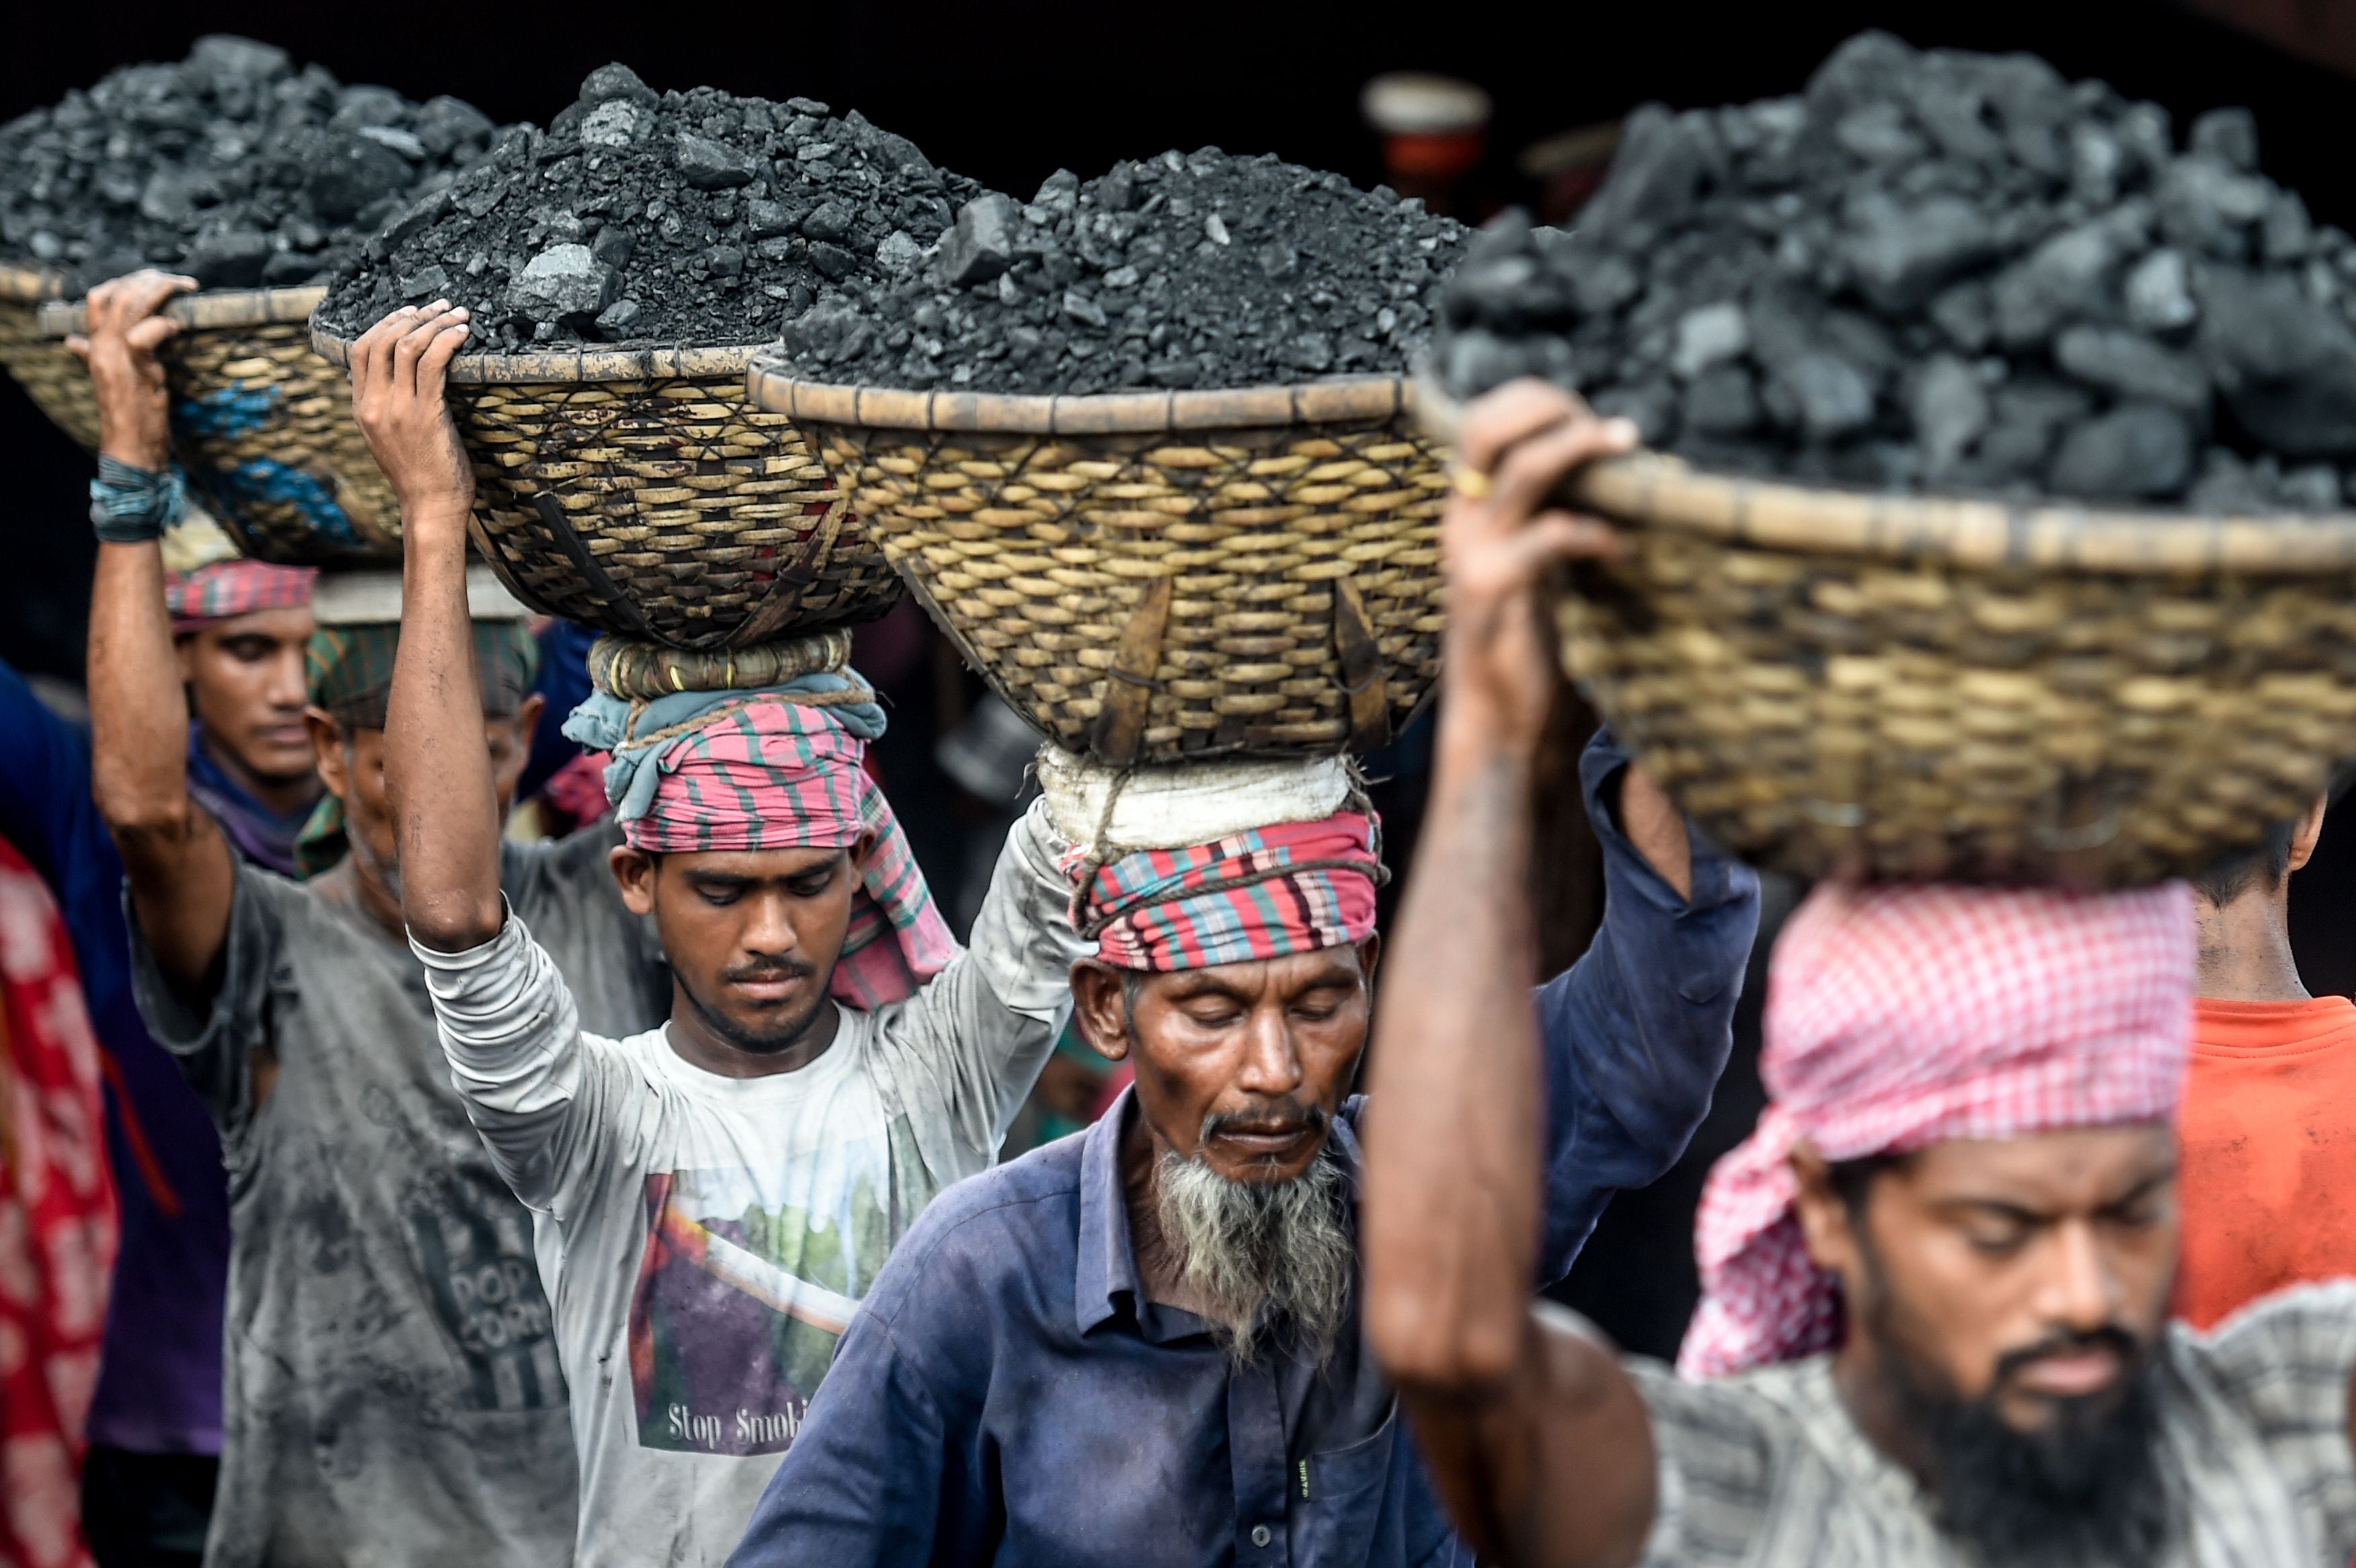 Labourers unload coal from a cargo ship in Dhaka